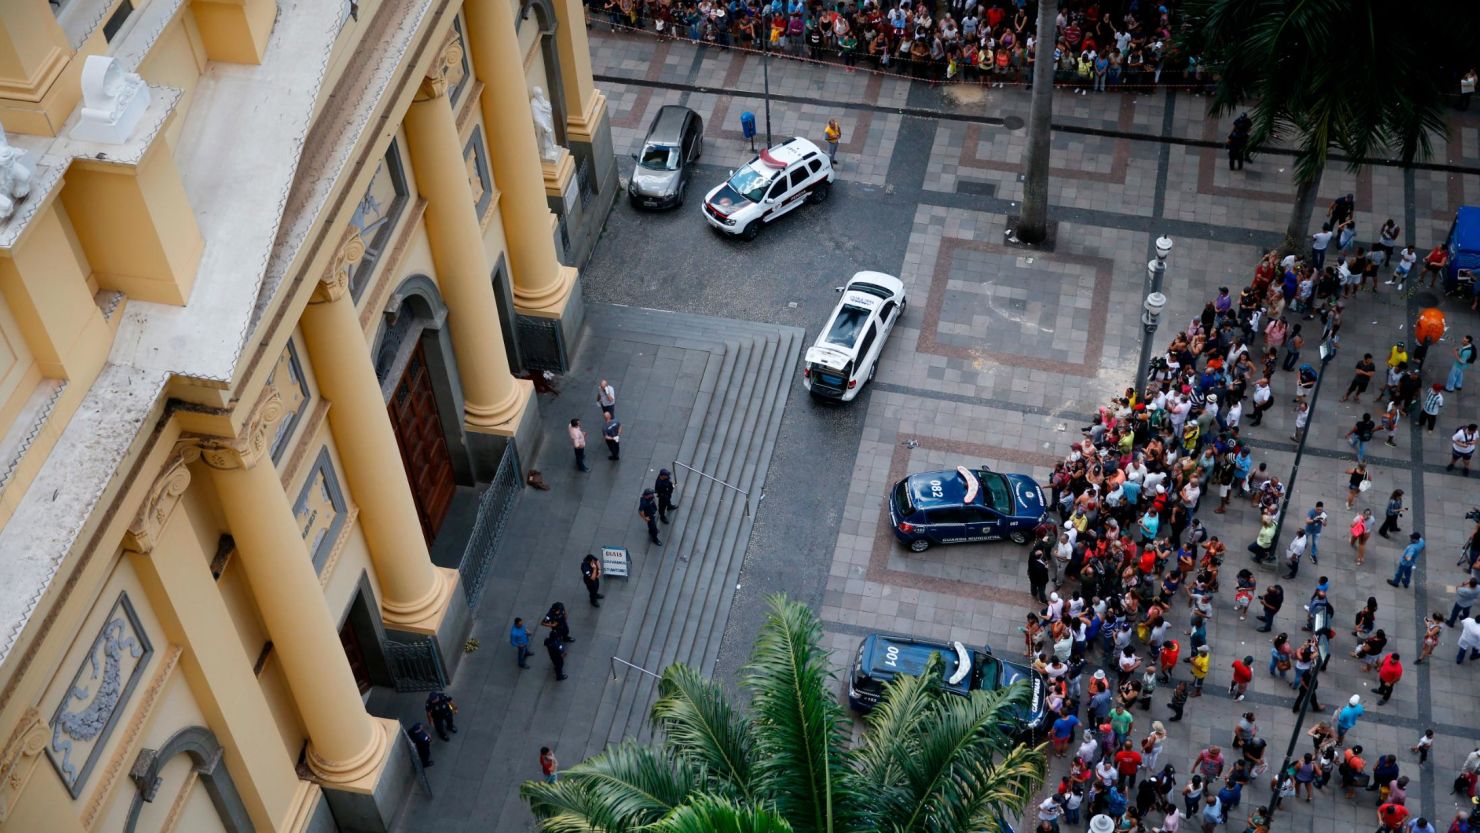 People gather outside the Cathedral of Campina after a man opened fire during mass and killed at least four people before committing suicide on Tuesday.